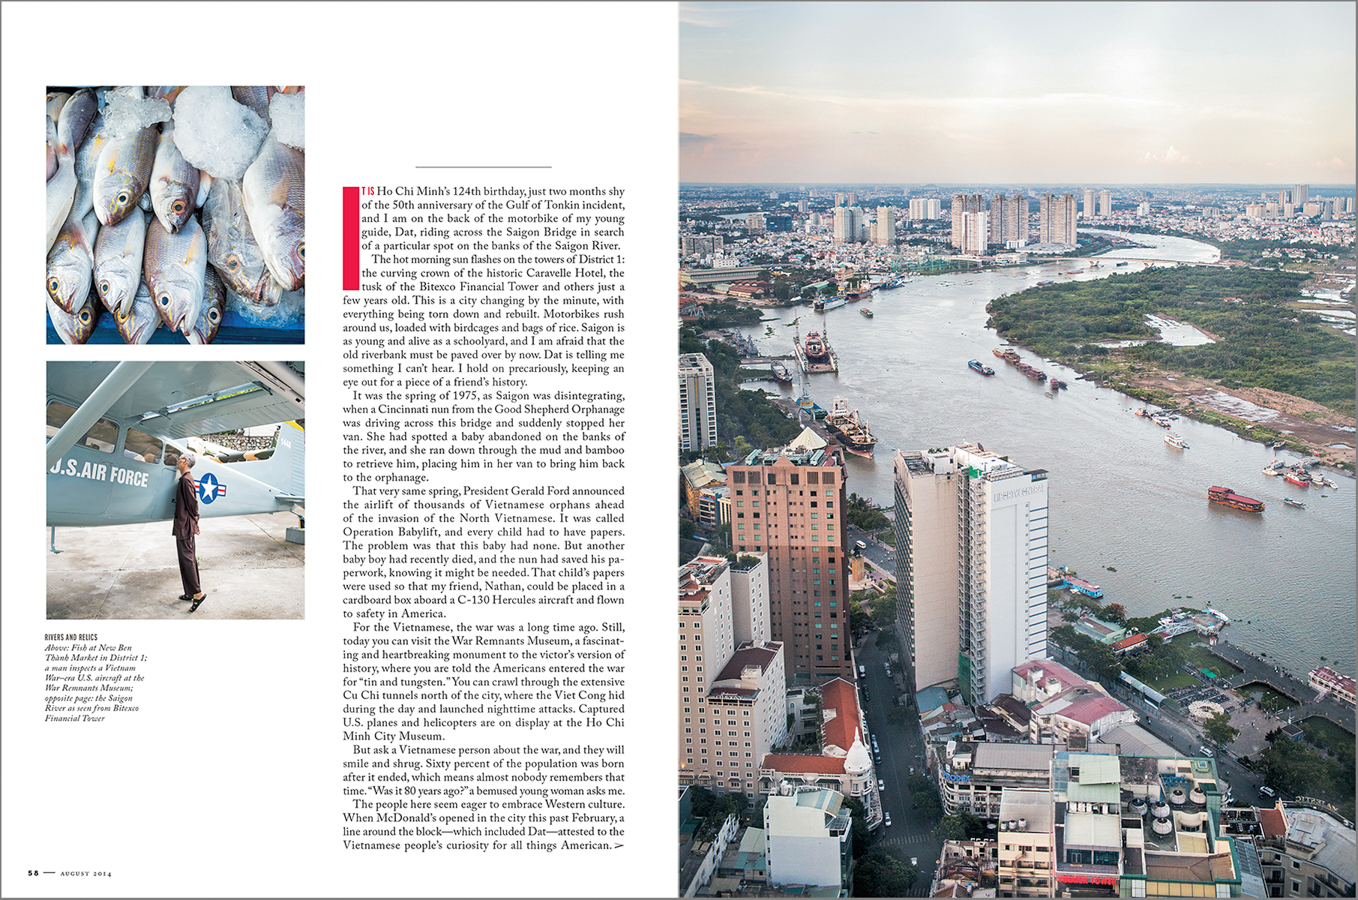 From a feature travel story on Ho Chi Minh City for United Airlines' Rhapsody magazine.